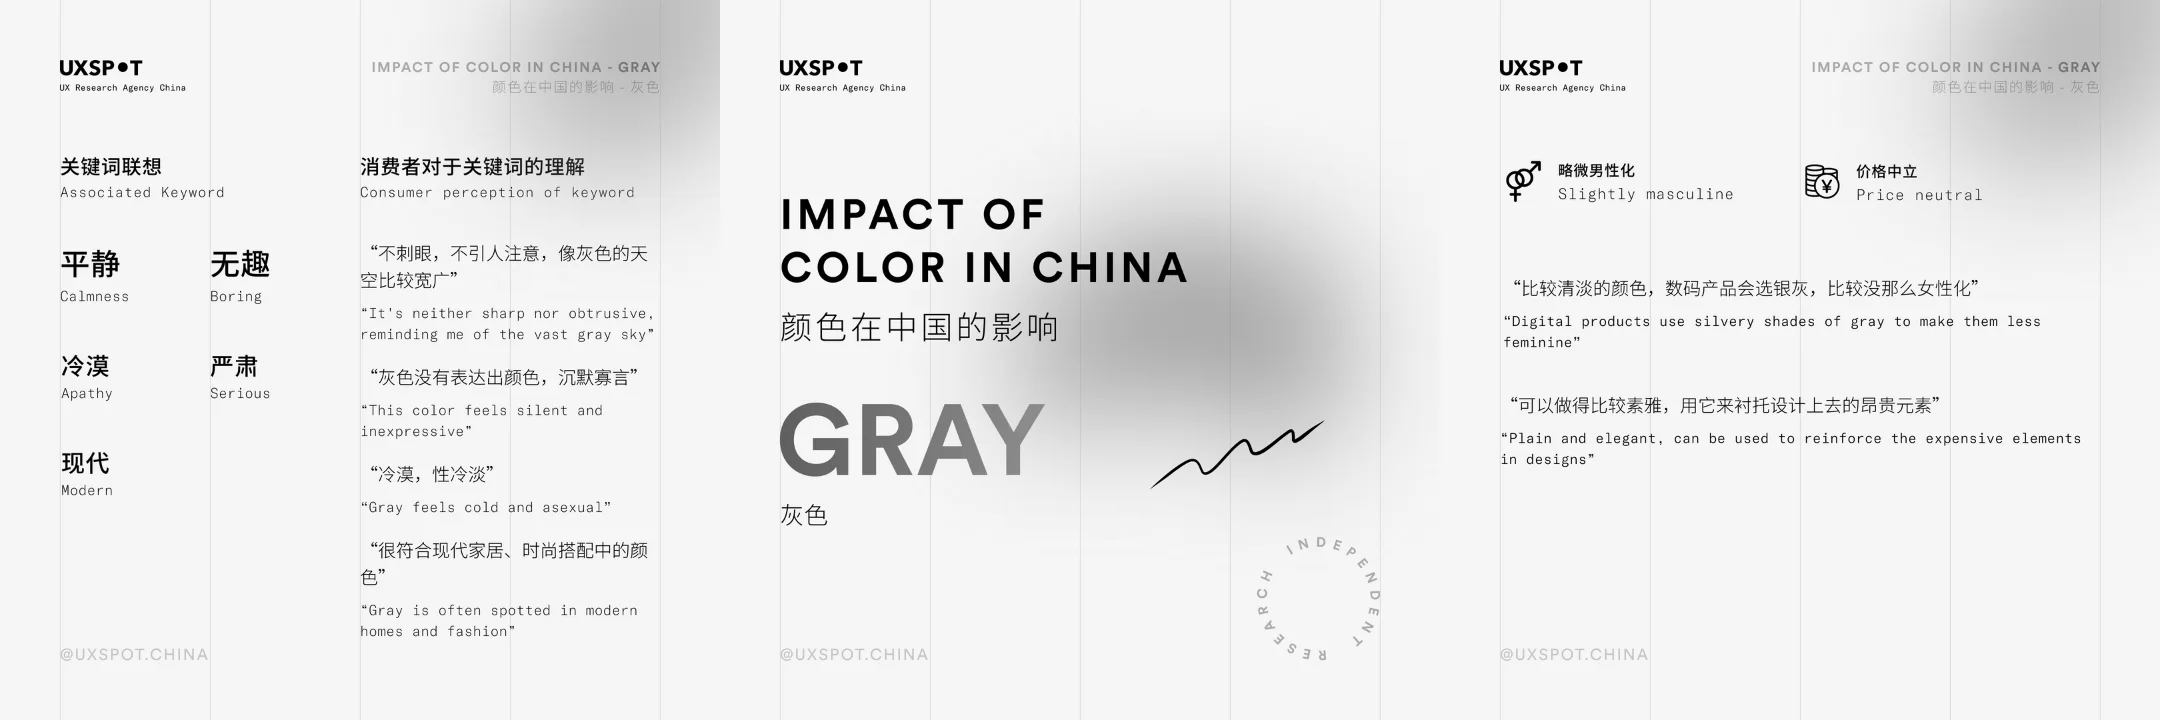 color psychology China color gray data summary